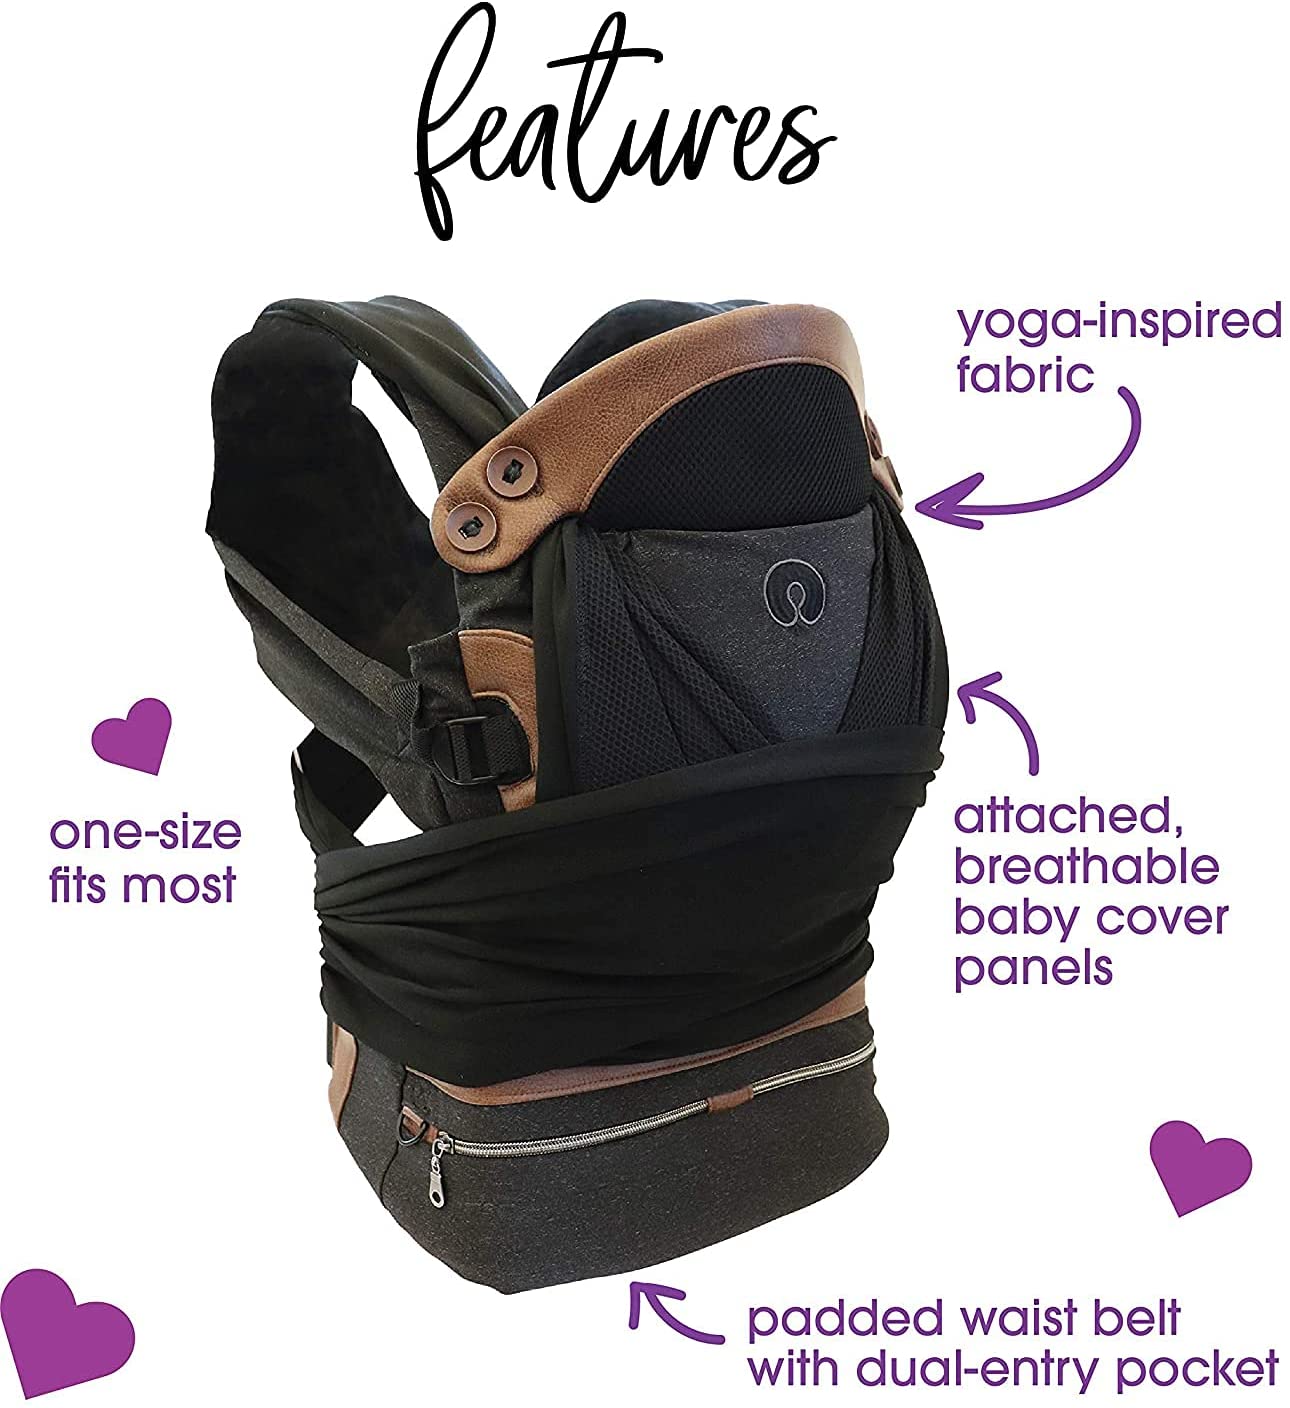  Chicco Boppy Adjust ComfyChic Baby Carrier, Charcoal